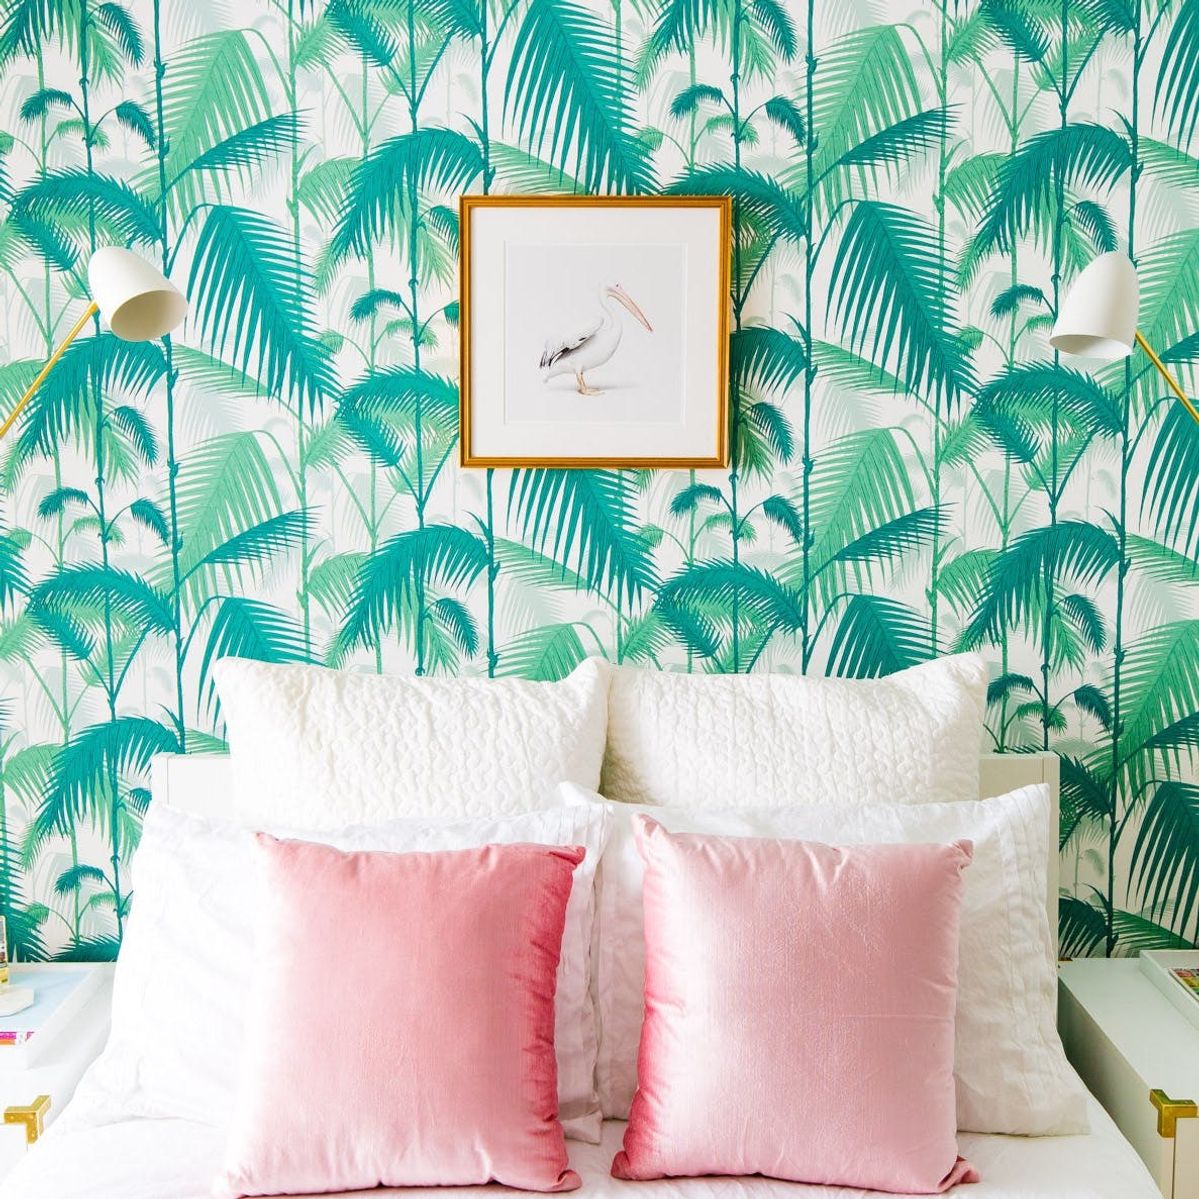 The Hottest 2019 Home Decor Trends, According to Pinterest